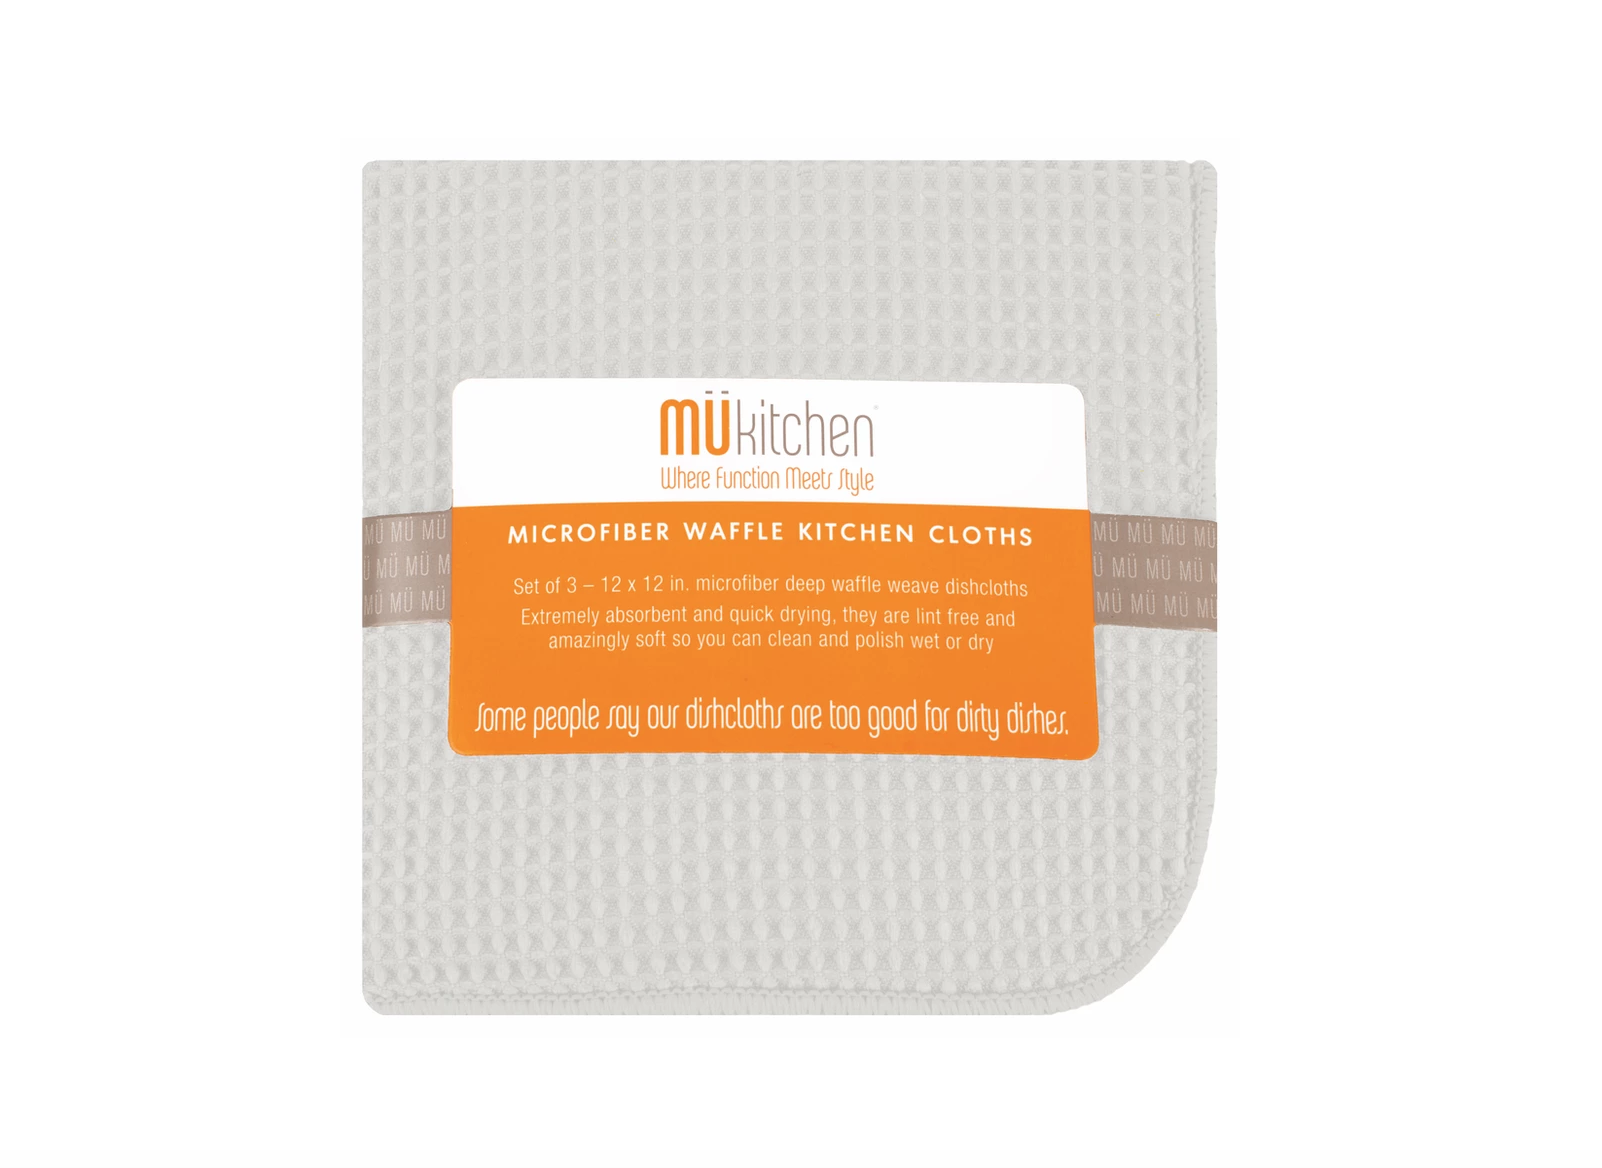 MUKitchen-Waffle-Weave-Microfiber-Cloths-and-Towels